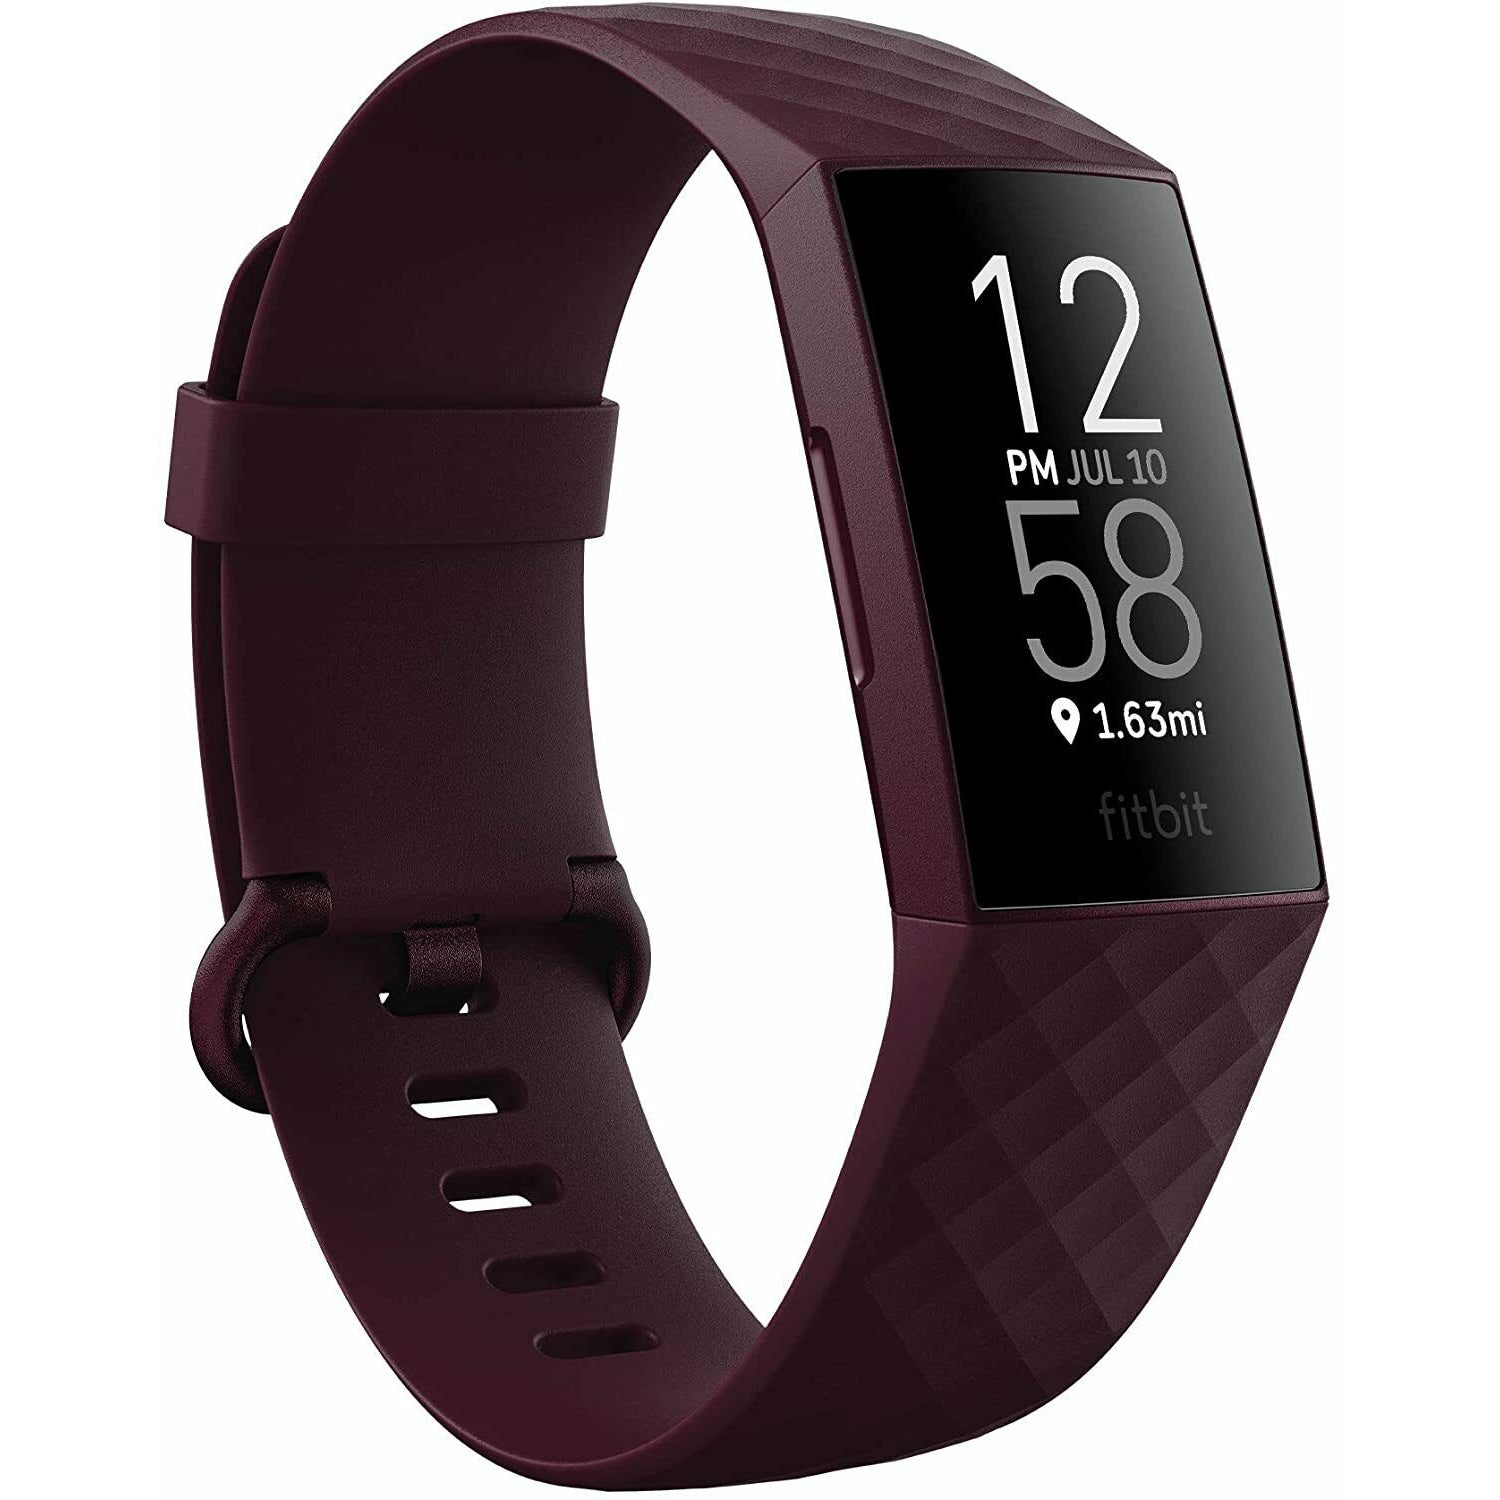 Fitbit Charge 4 Advanced Fitness Tracker with GPS - Rosewood - Refurbished Good - No Strap